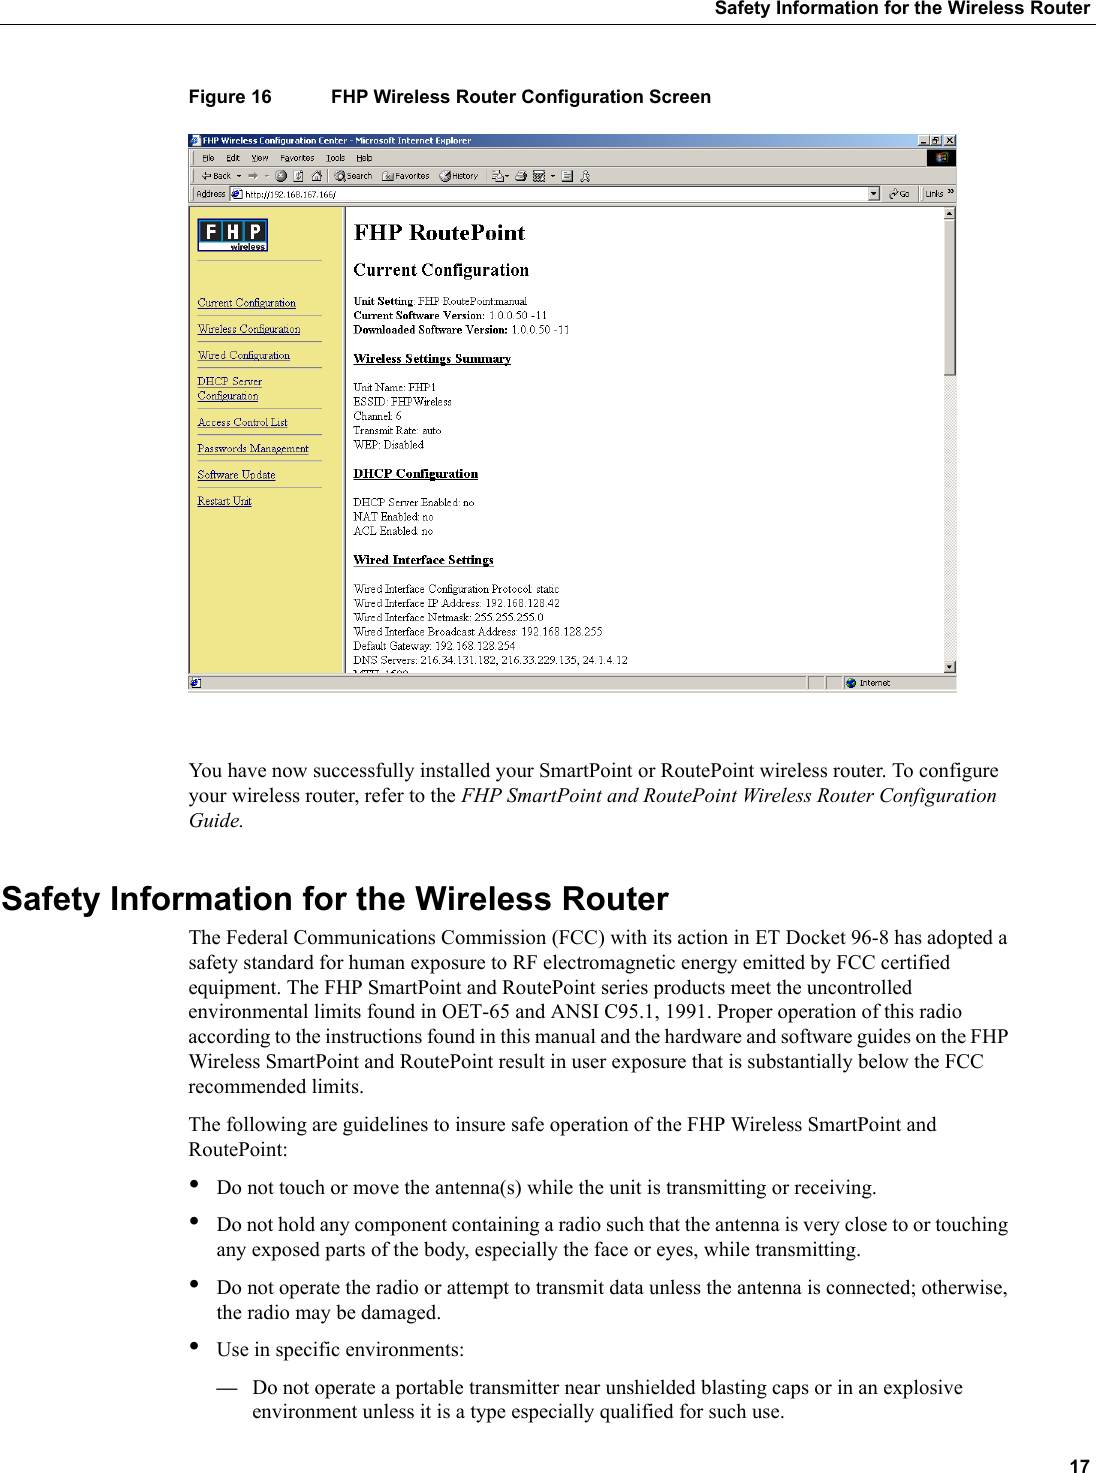  17Safety Information for the Wireless RouterFigure 16 FHP Wireless Router Configuration ScreenYou have now successfully installed your SmartPoint or RoutePoint wireless router. To configure your wireless router, refer to the FHP SmartPoint and RoutePoint Wireless Router Configuration Guide.Safety Information for the Wireless RouterThe Federal Communications Commission (FCC) with its action in ET Docket 96-8 has adopted a safety standard for human exposure to RF electromagnetic energy emitted by FCC certified equipment. The FHP SmartPoint and RoutePoint series products meet the uncontrolled environmental limits found in OET-65 and ANSI C95.1, 1991. Proper operation of this radio according to the instructions found in this manual and the hardware and software guides on the FHP Wireless SmartPoint and RoutePoint result in user exposure that is substantially below the FCC recommended limits.The following are guidelines to insure safe operation of the FHP Wireless SmartPoint and RoutePoint:•Do not touch or move the antenna(s) while the unit is transmitting or receiving.•Do not hold any component containing a radio such that the antenna is very close to or touching any exposed parts of the body, especially the face or eyes, while transmitting. •Do not operate the radio or attempt to transmit data unless the antenna is connected; otherwise, the radio may be damaged.•Use in specific environments:—Do not operate a portable transmitter near unshielded blasting caps or in an explosive environment unless it is a type especially qualified for such use.